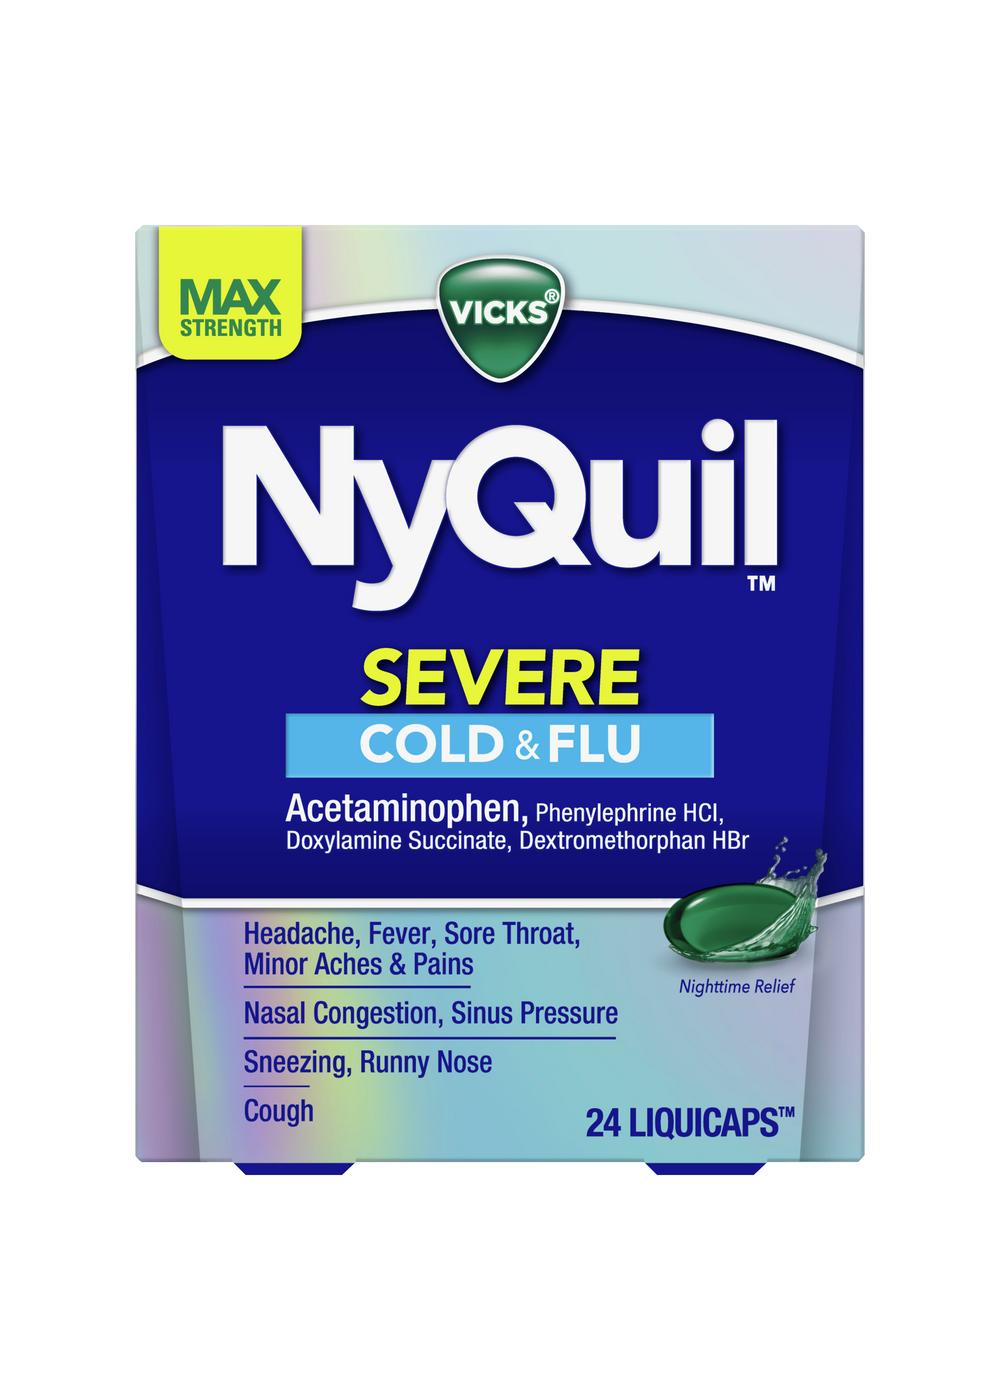 Vicks NyQuil SEVERE Cold & Flu Liquicaps; image 1 of 11